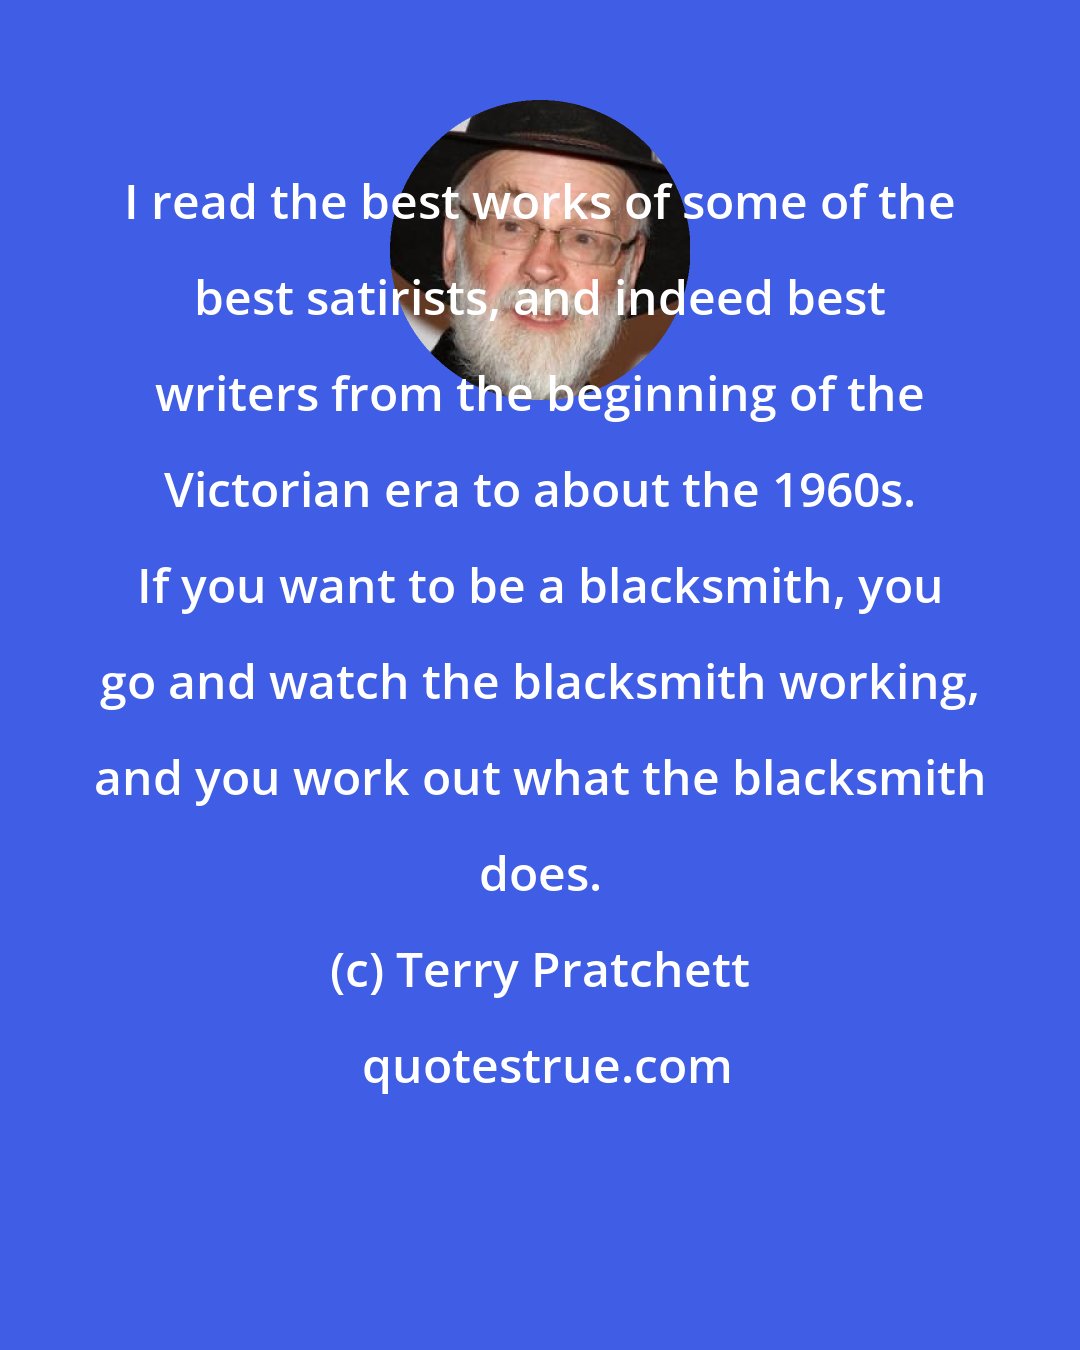 Terry Pratchett: I read the best works of some of the best satirists, and indeed best writers from the beginning of the Victorian era to about the 1960s. If you want to be a blacksmith, you go and watch the blacksmith working, and you work out what the blacksmith does.